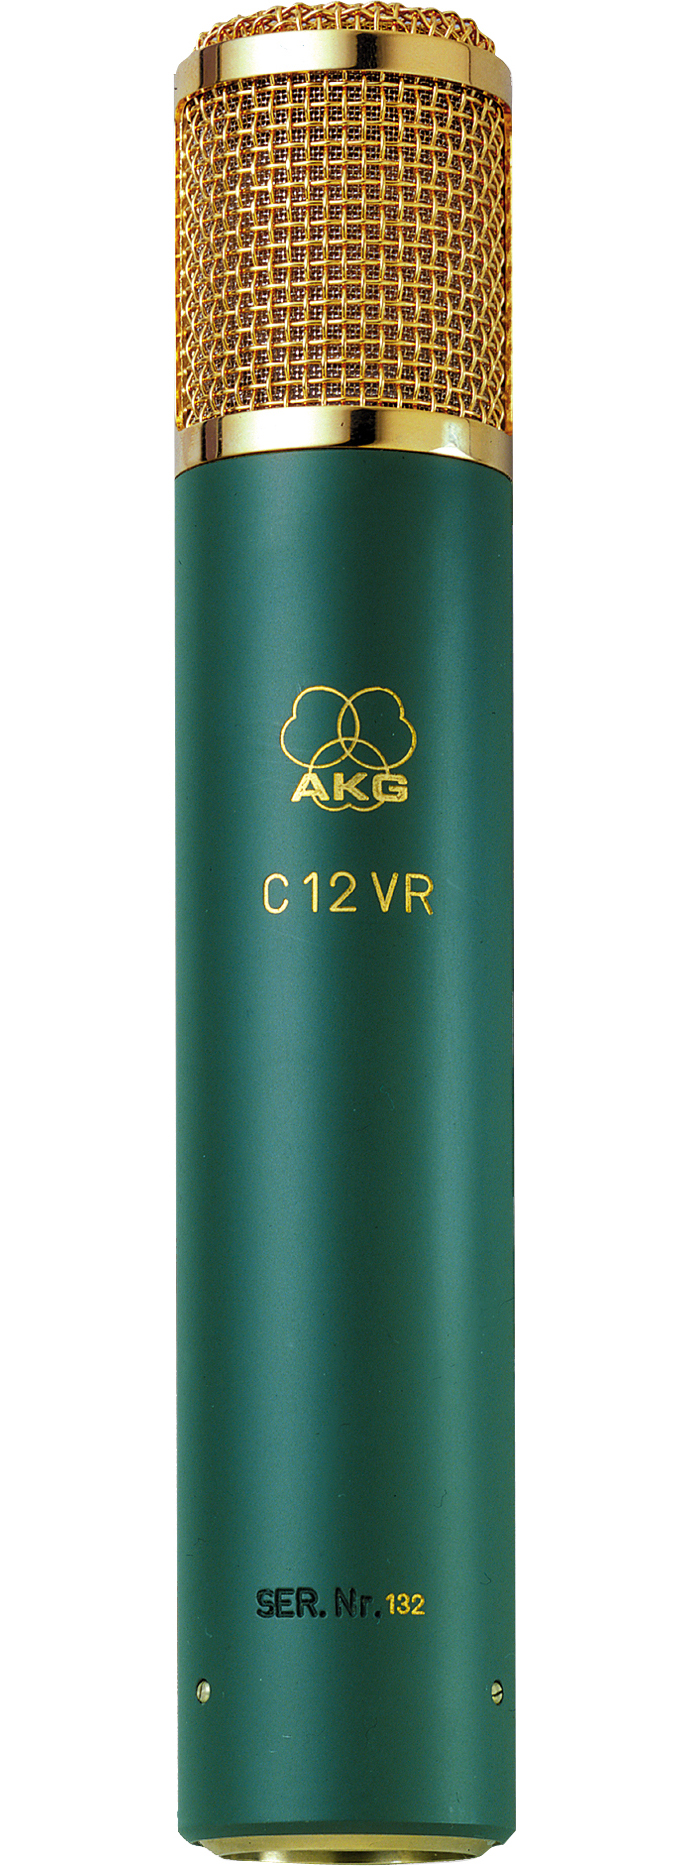 AKG 12C12VR is a reference multi-pattern tube studio condenser microphone